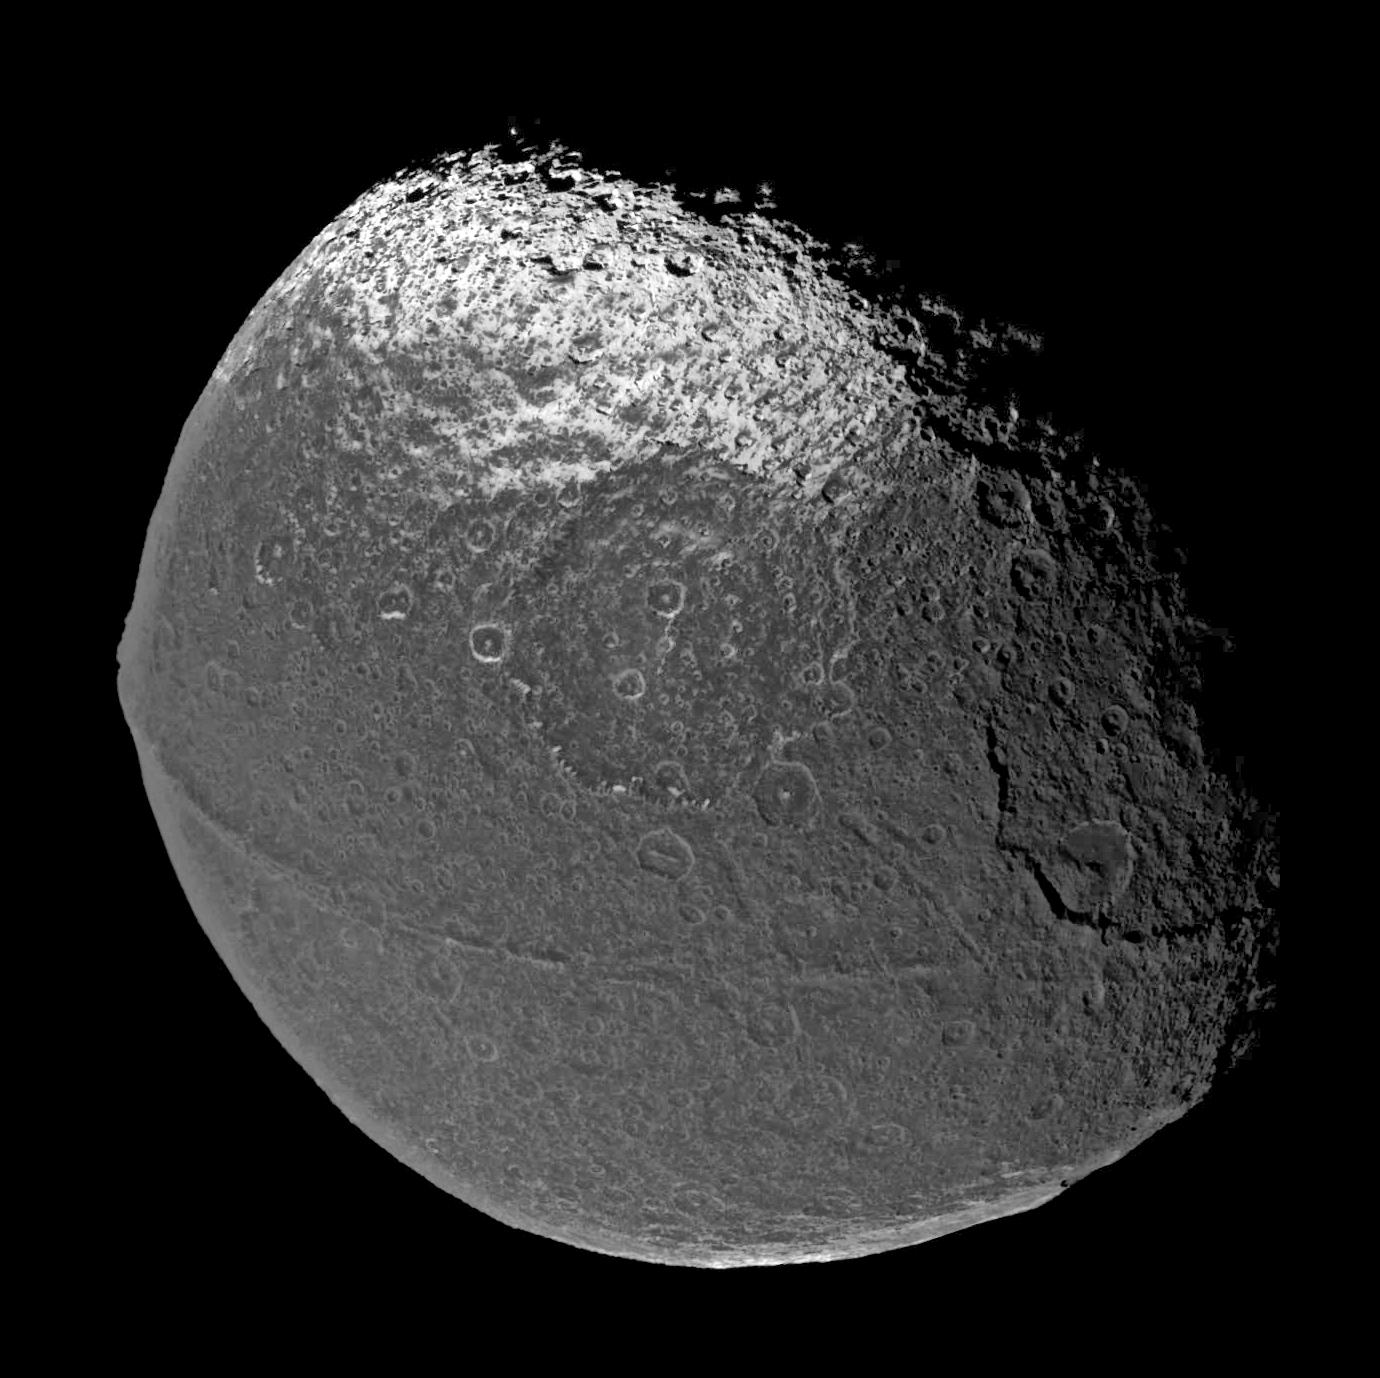 On New Year's Eve 2004, Cassini flew past Saturn's intriguing moon Iapetus, capturing the four visible light images that were put together to form this global view.